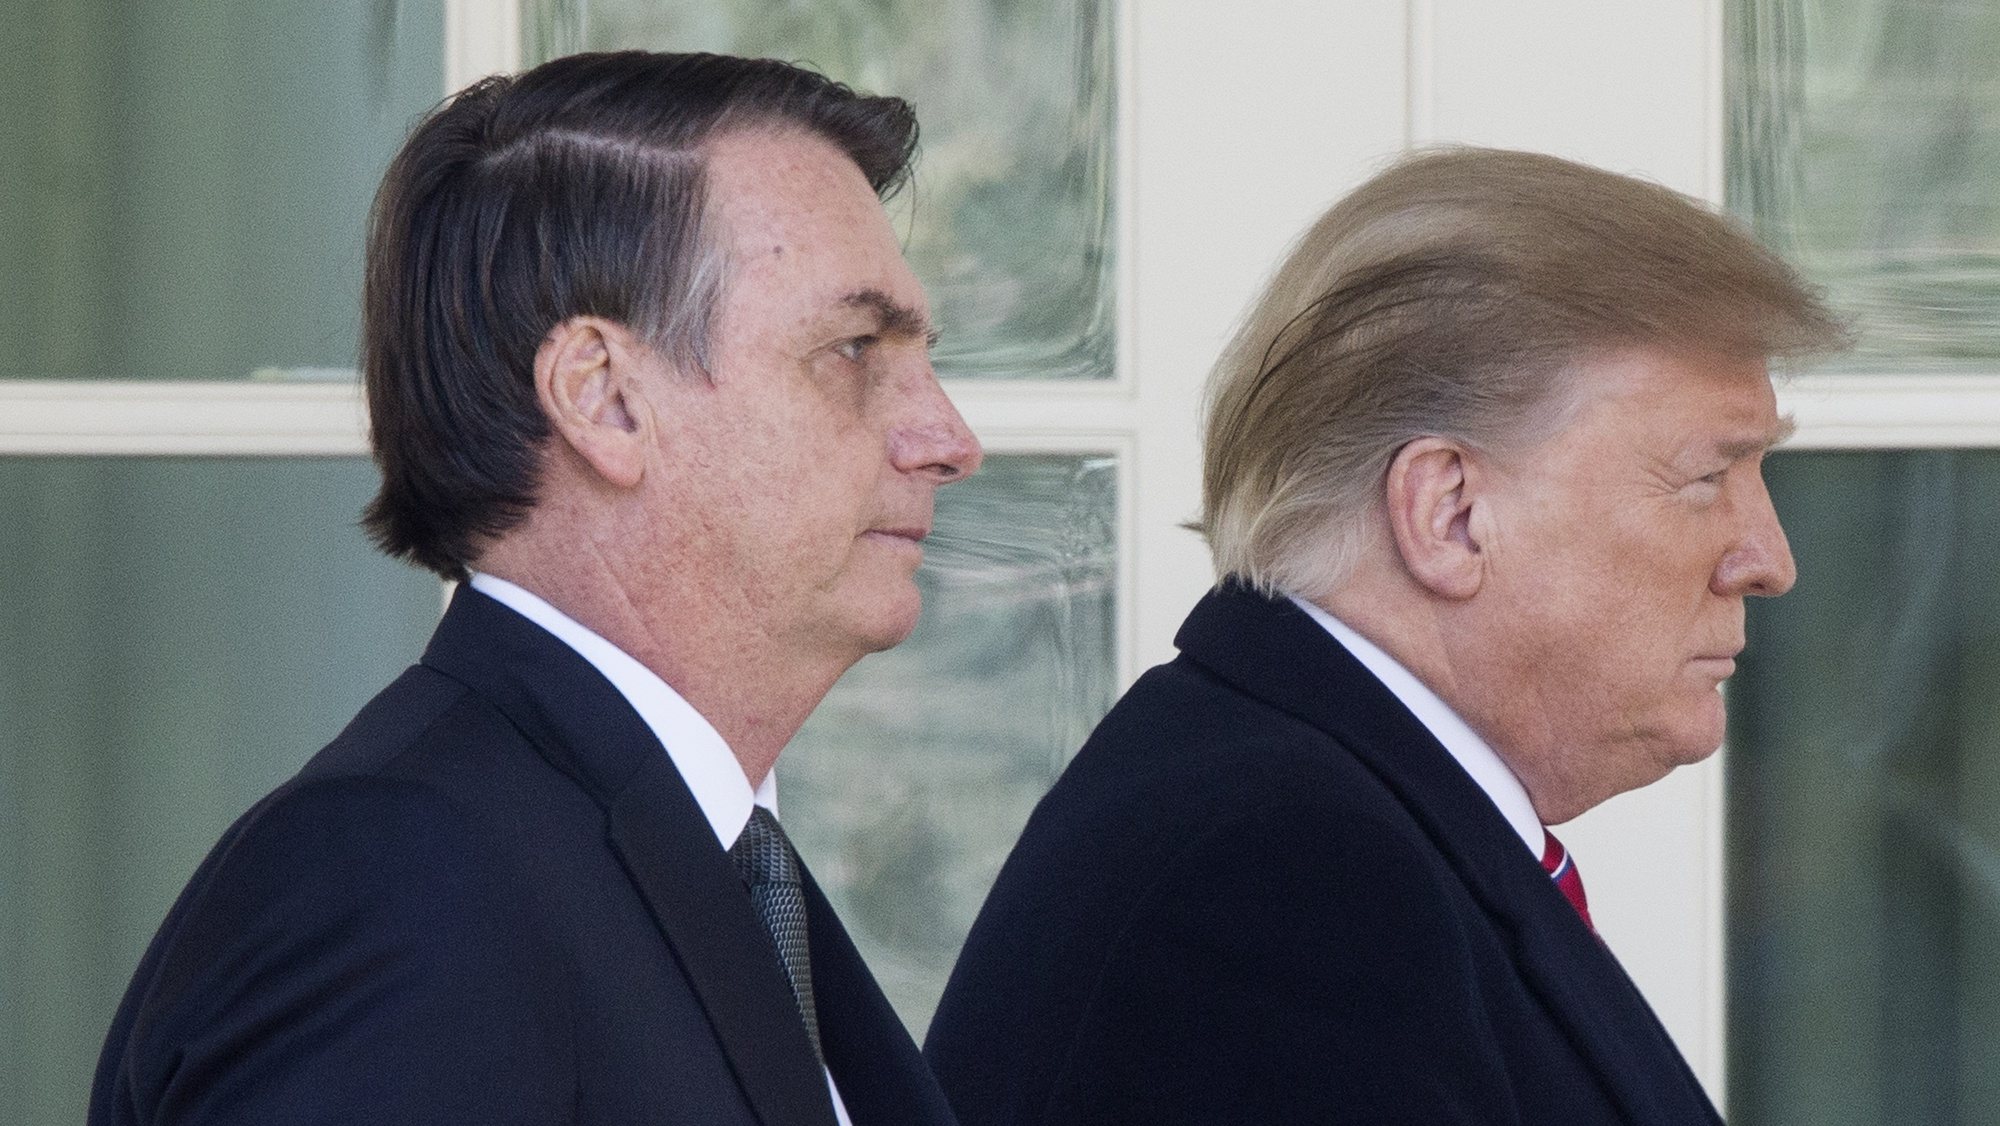 epa08939614 (FILE) US President Donald J. Trump (R) and Brazilian President Jair Bolsonaro (L) walk down the Colonnade to hold a joint news conference in the Rose Garden of the White House in Washington, DC, USA, 19 March 2019. Bolsonaro, a right-wing nationalist who earned the nickname the &#039;Trump of the Tropics,&#039; met with President Trump for bilateral negotiations and a joint press conference. The presidency of Donald Trump, which records two impeachments, will end at noon on 20 January 2021.  EPA/MICHAEL REYNOLDS *** Local Caption *** 55069012